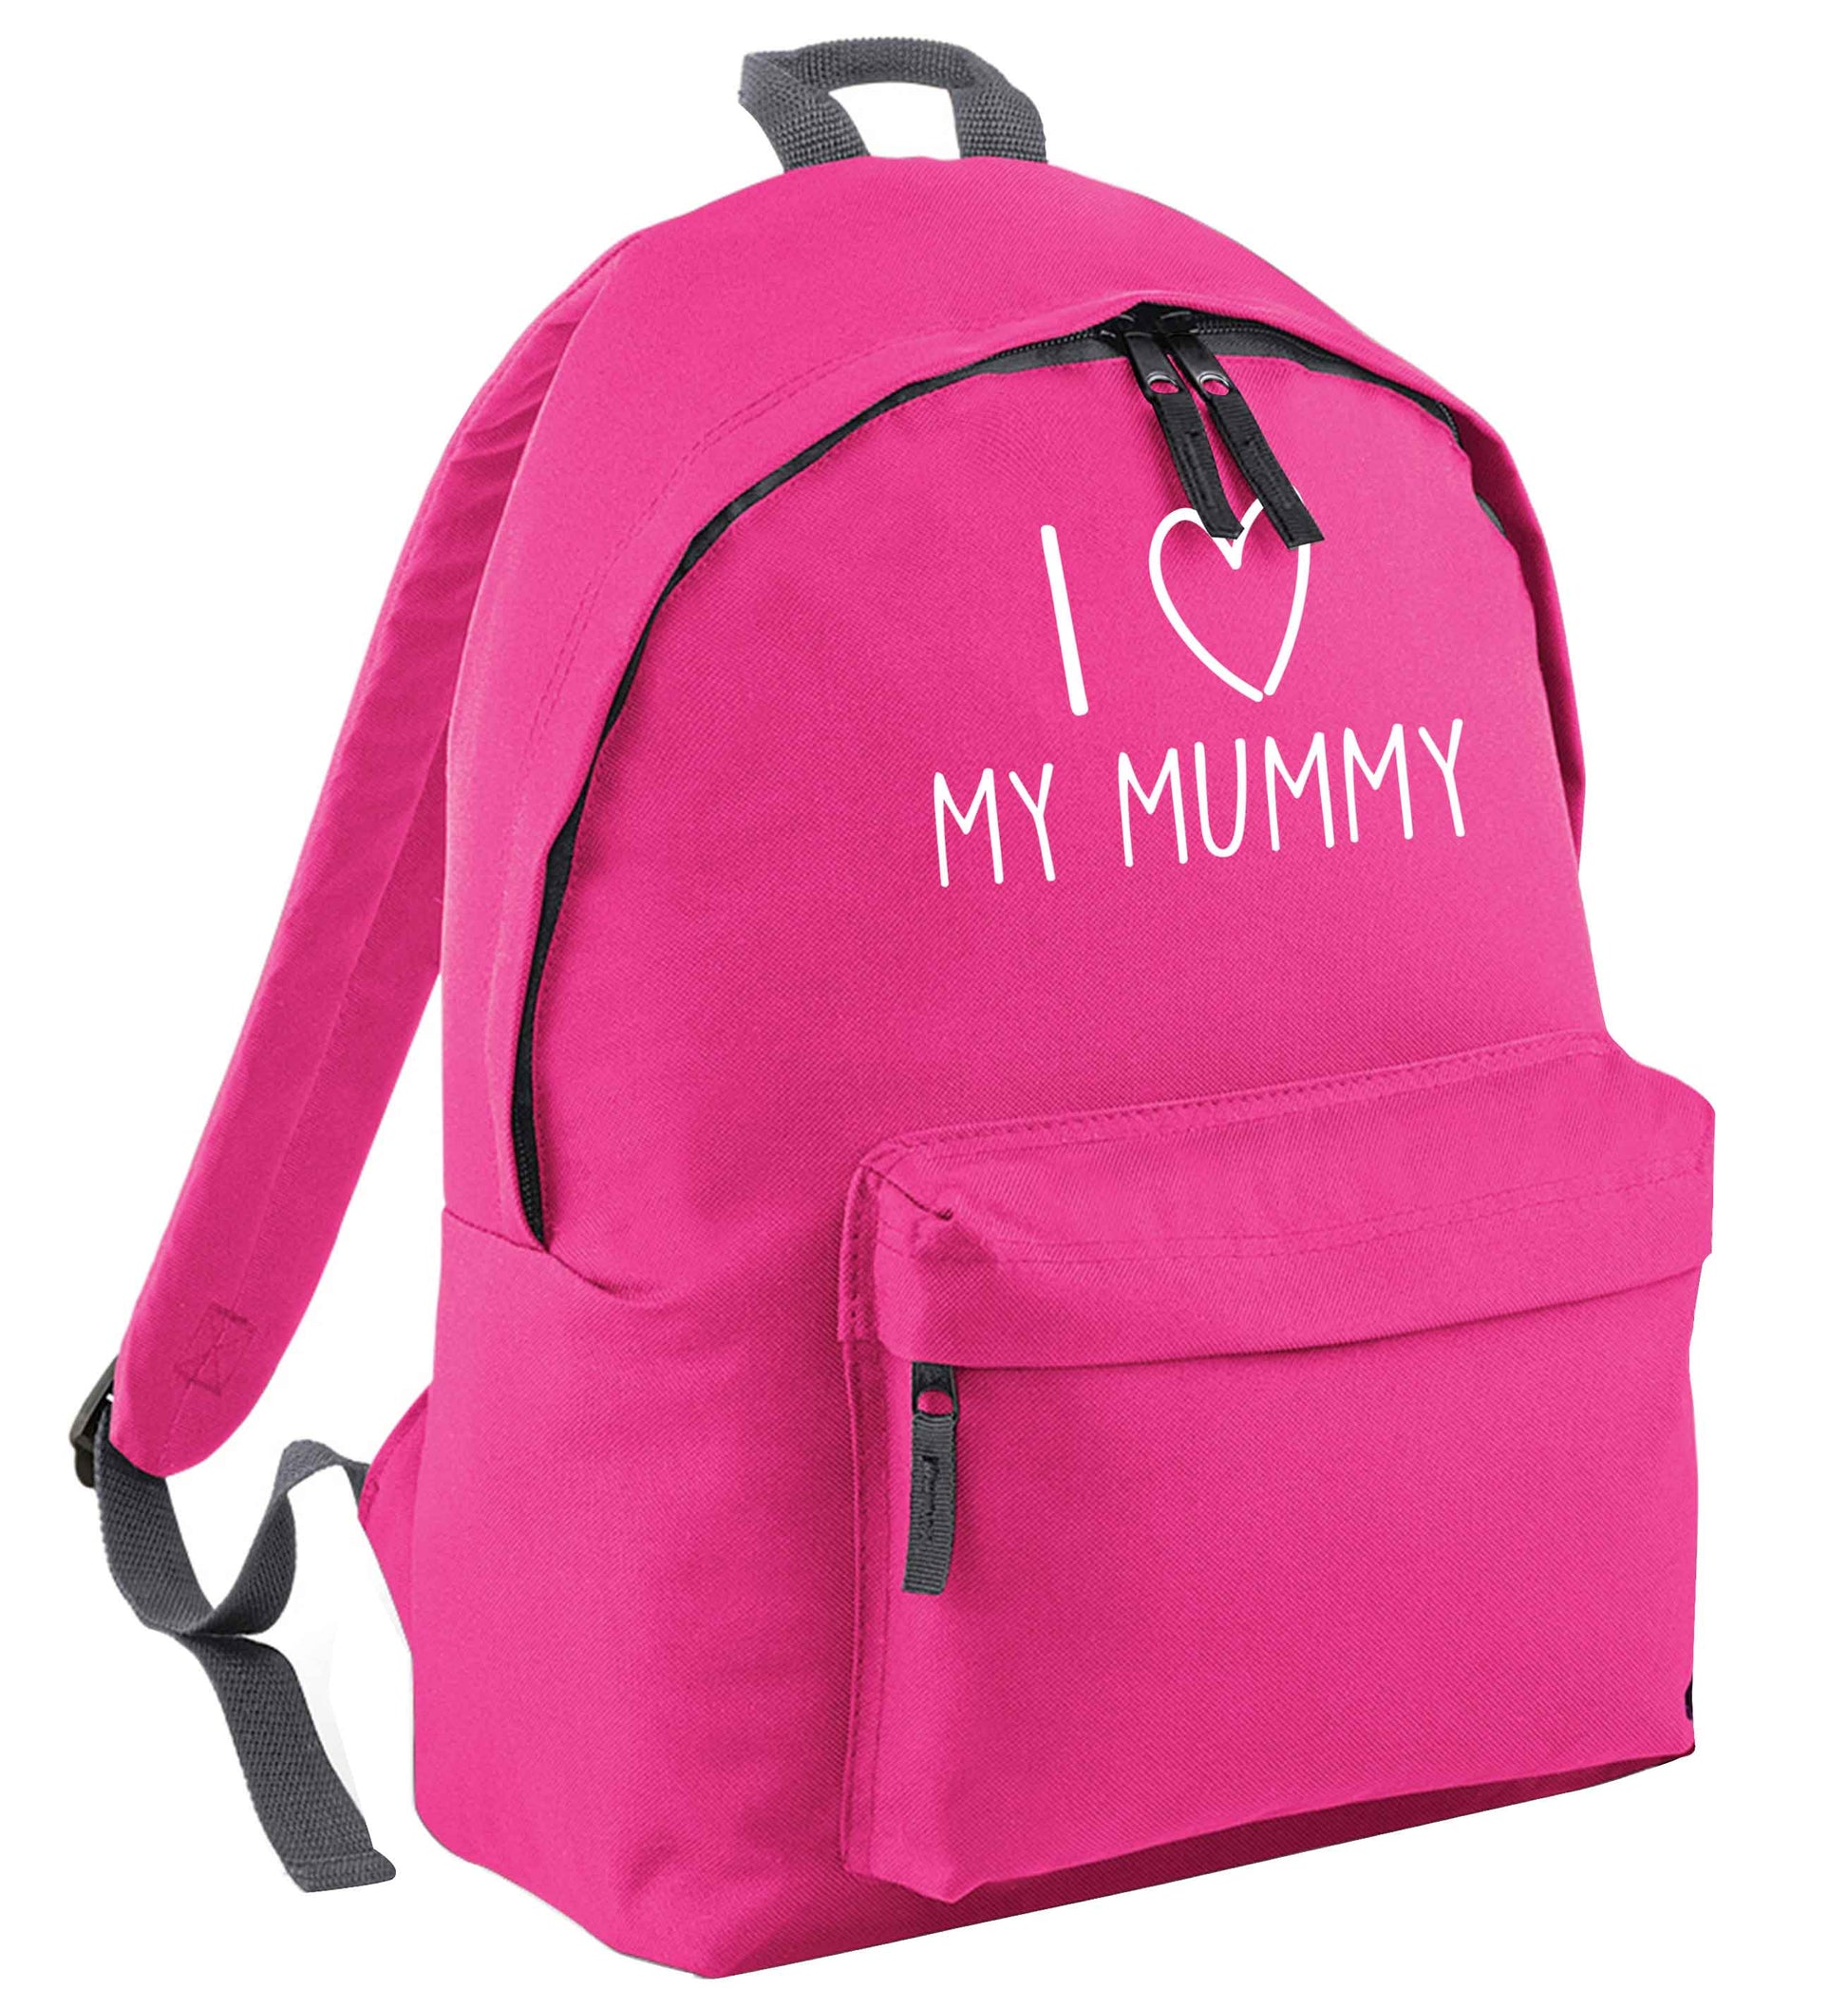 I love my mummy pink childrens backpack